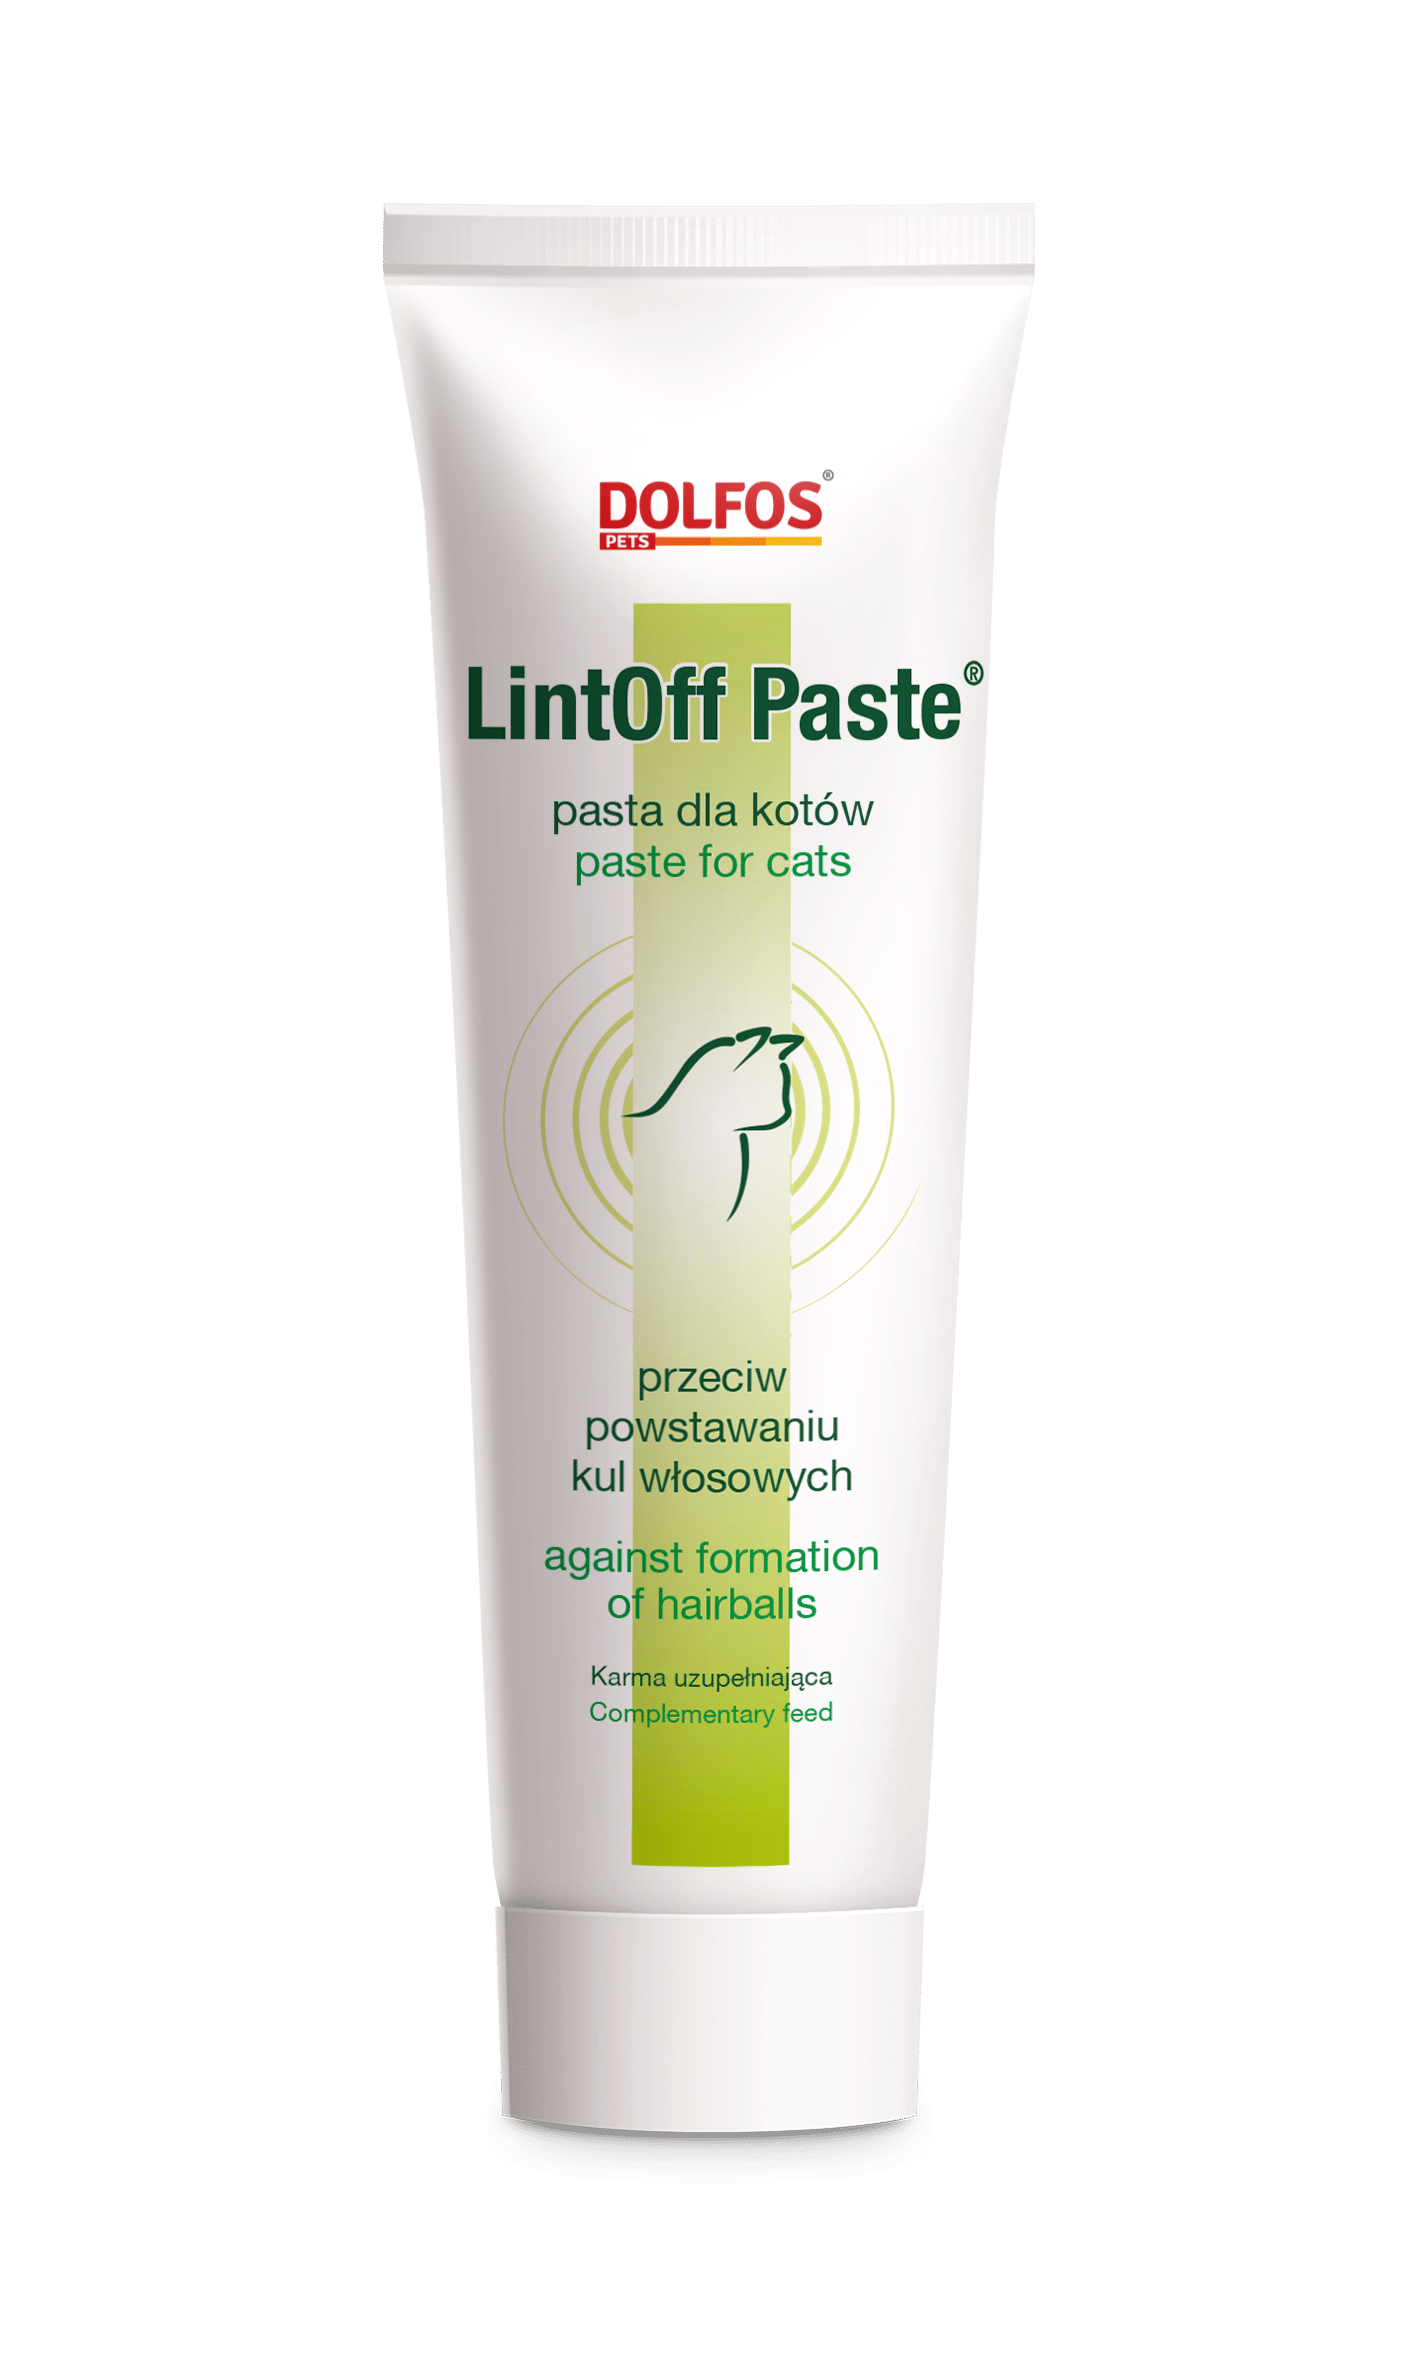 Malta Lintoff Paste for cats is a paste for cats that reduces the formation of hairballs (pilobezoans) in the digestive system.